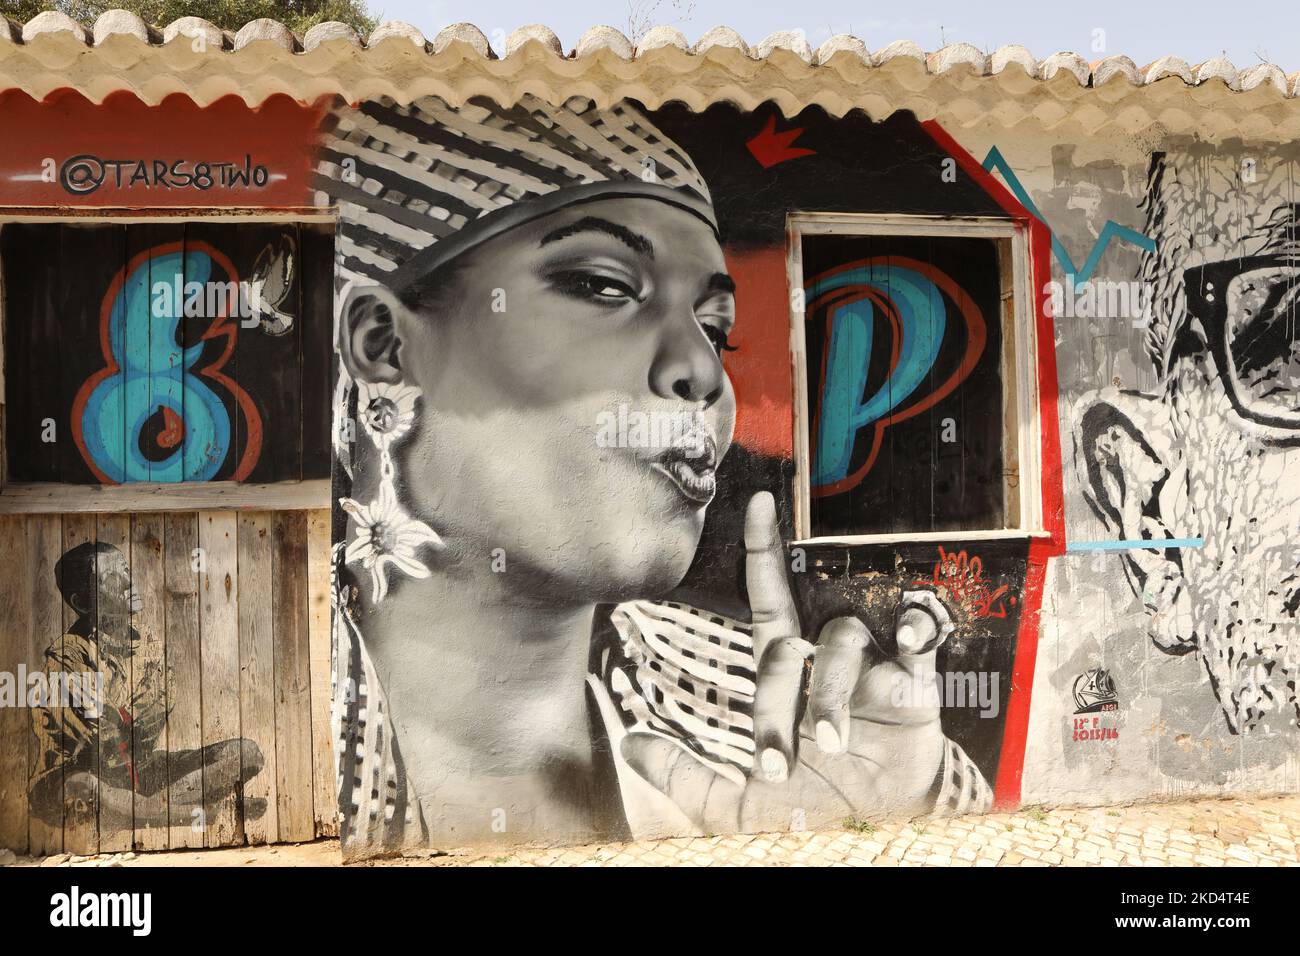 Street Art. A mural of an African woman and a boy sitting cross legged painted on an old building. Lagos, Algarve, Portugal Stock Photo